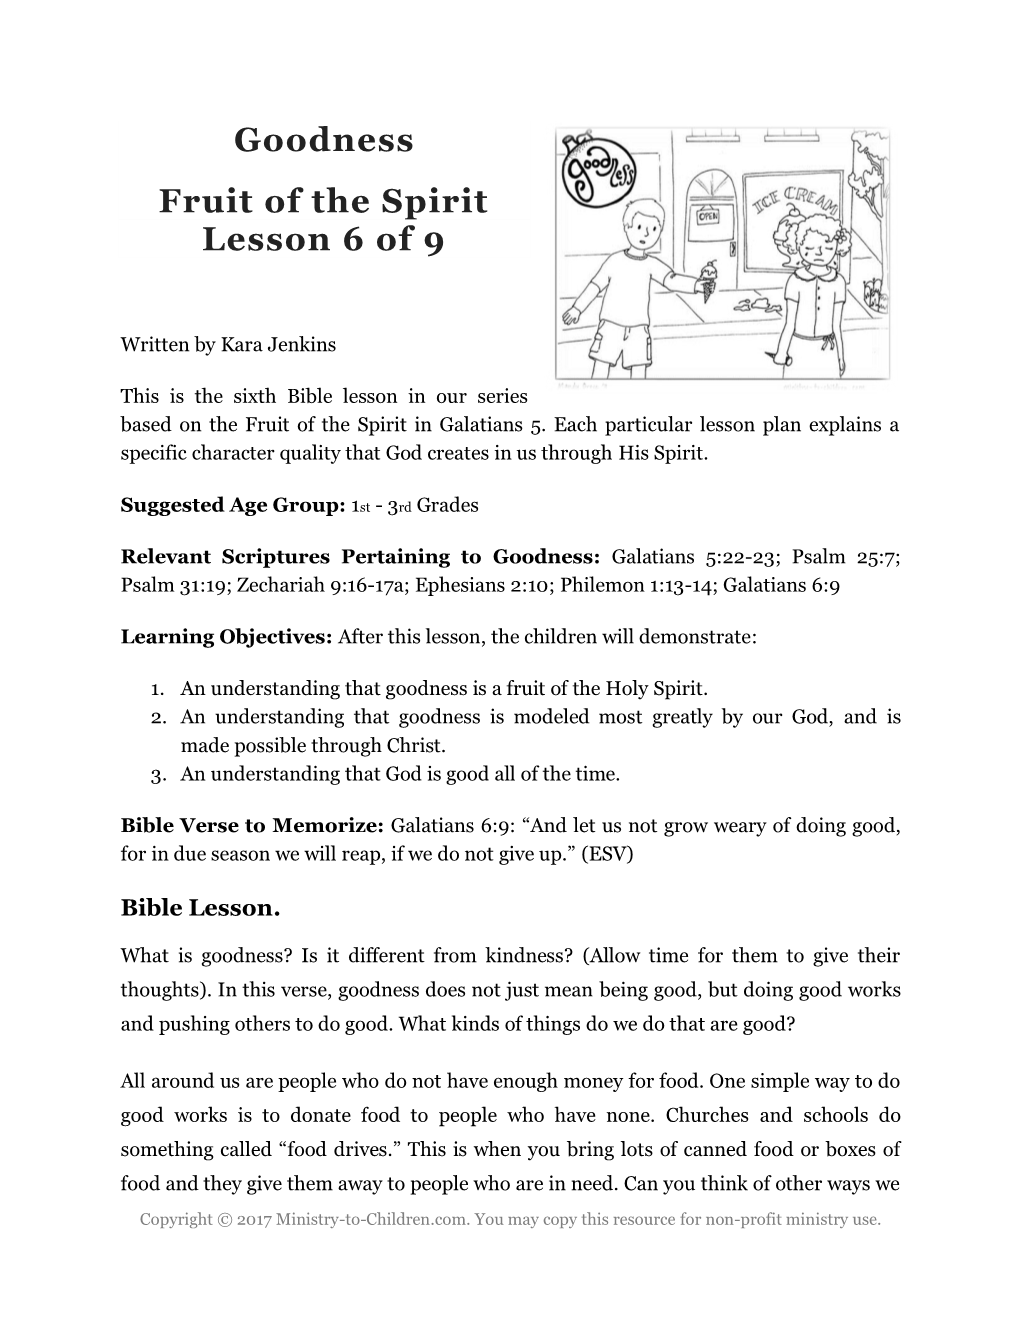 Goodness Fruit of the Spirit Lesson 6 of 9